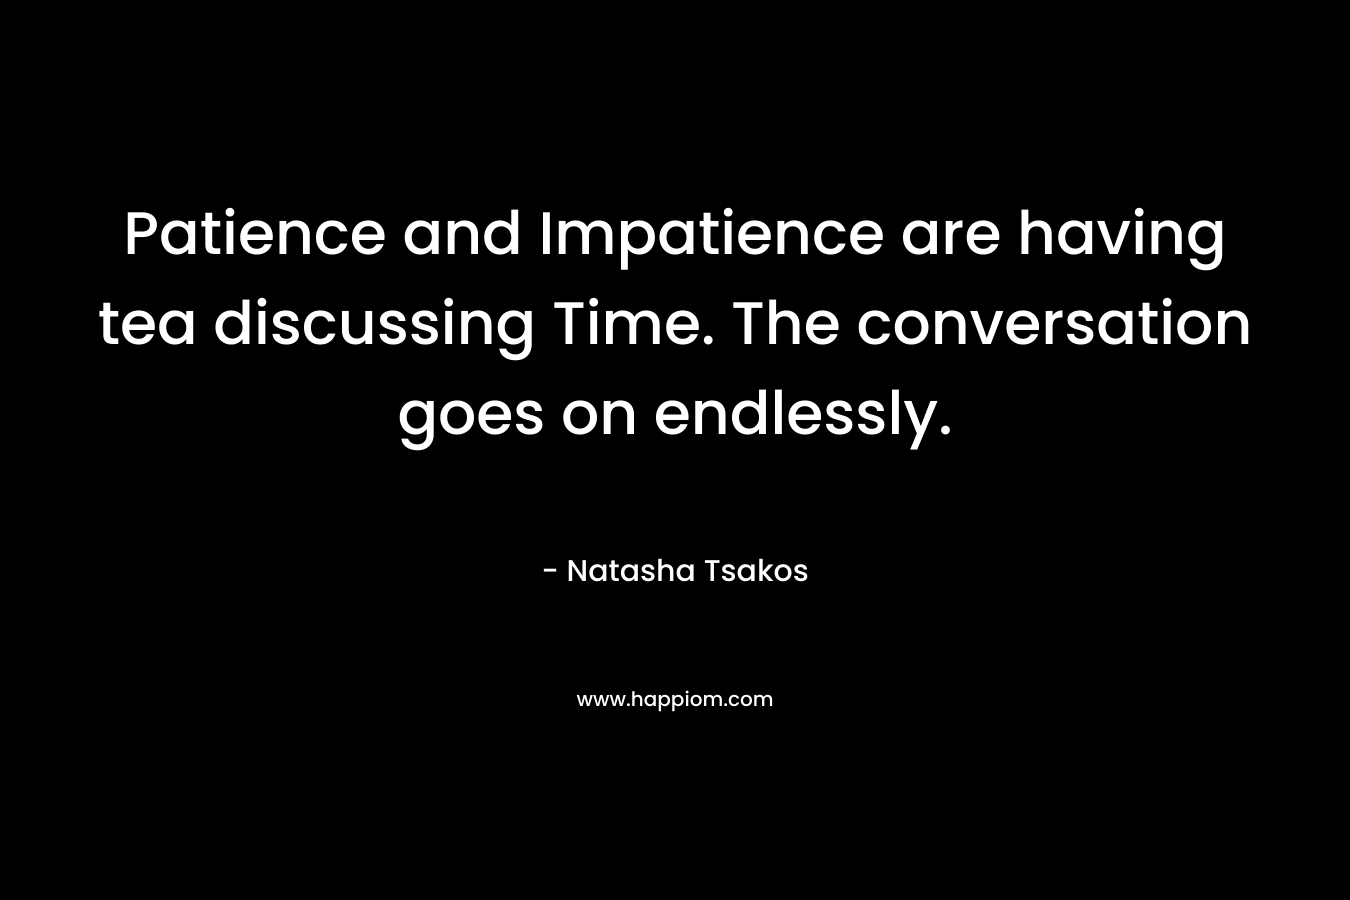 Patience and Impatience are having tea discussing Time. The conversation goes on endlessly. – Natasha Tsakos